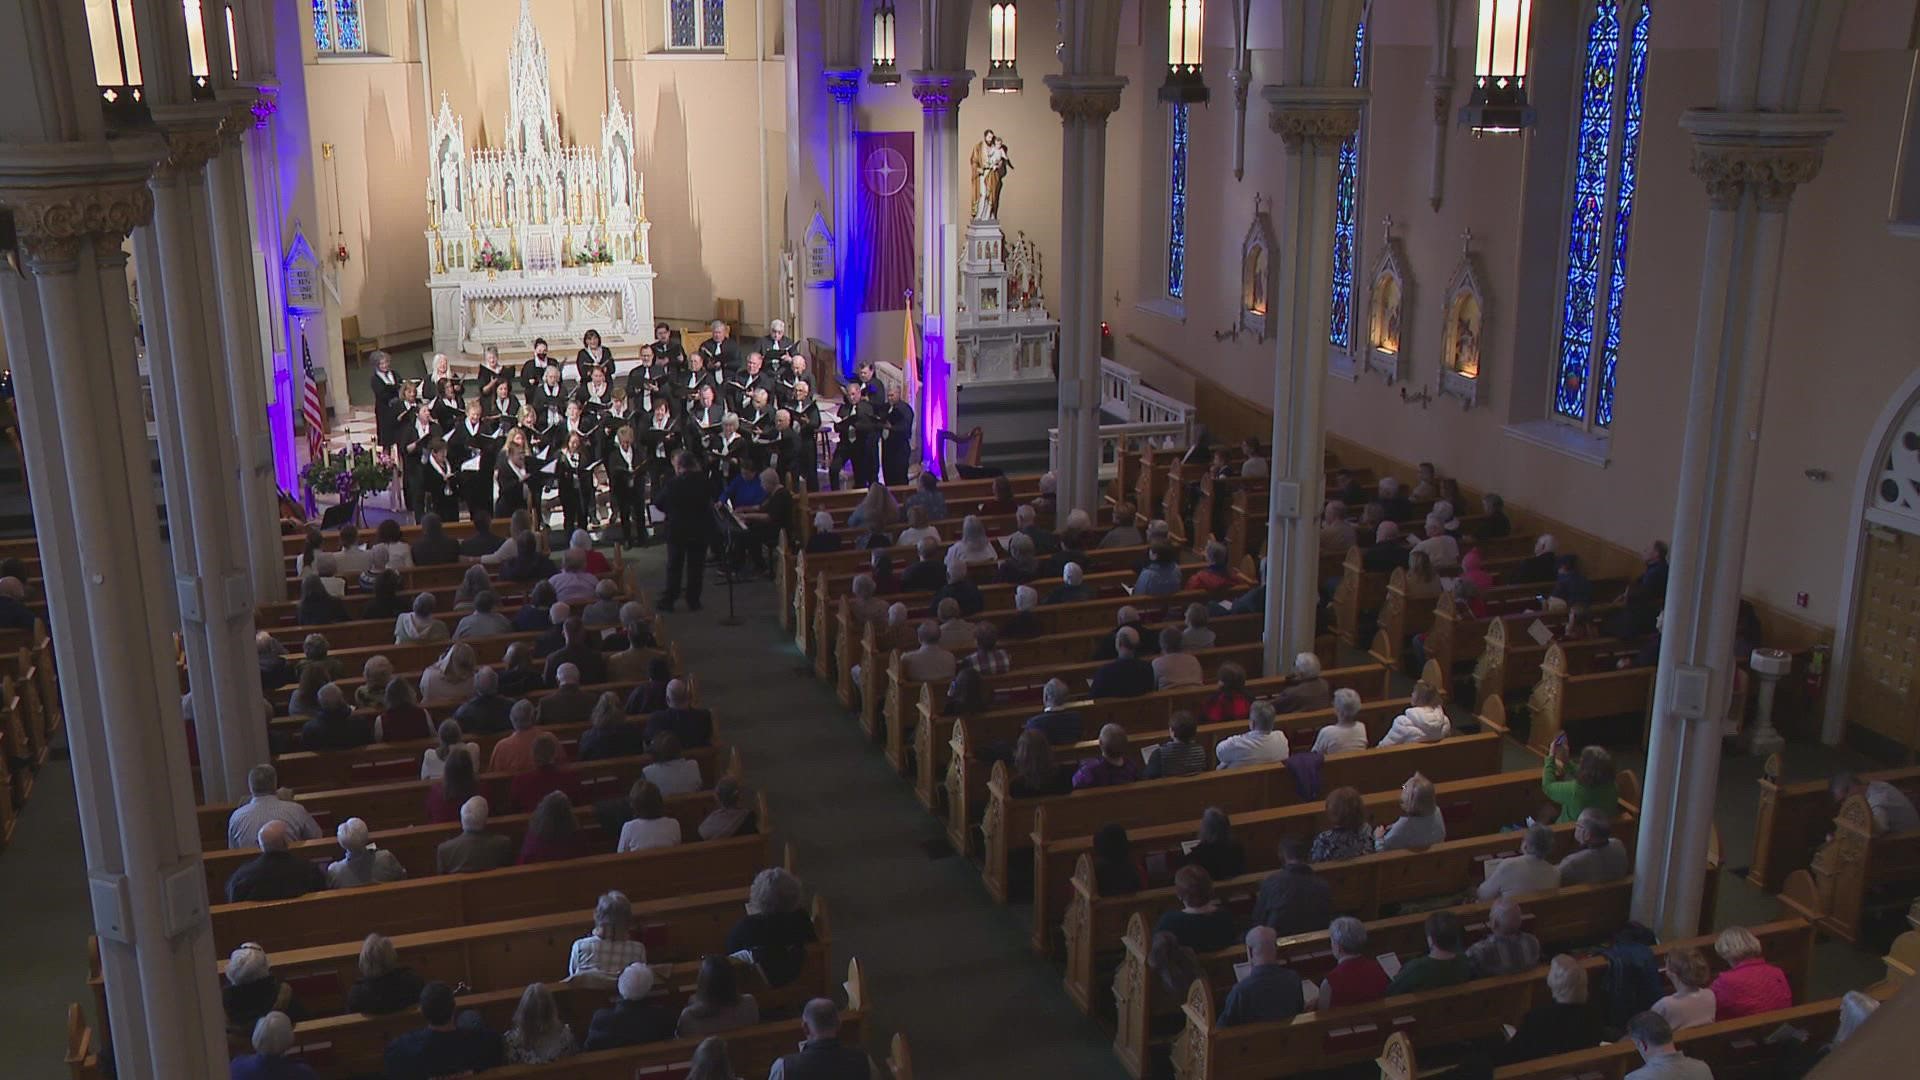 The Collinsville Chorale presented its final season at St. Mary's Catholic Church in Alton, Illinois. It performed a Christmas concert Sunday afternoon.